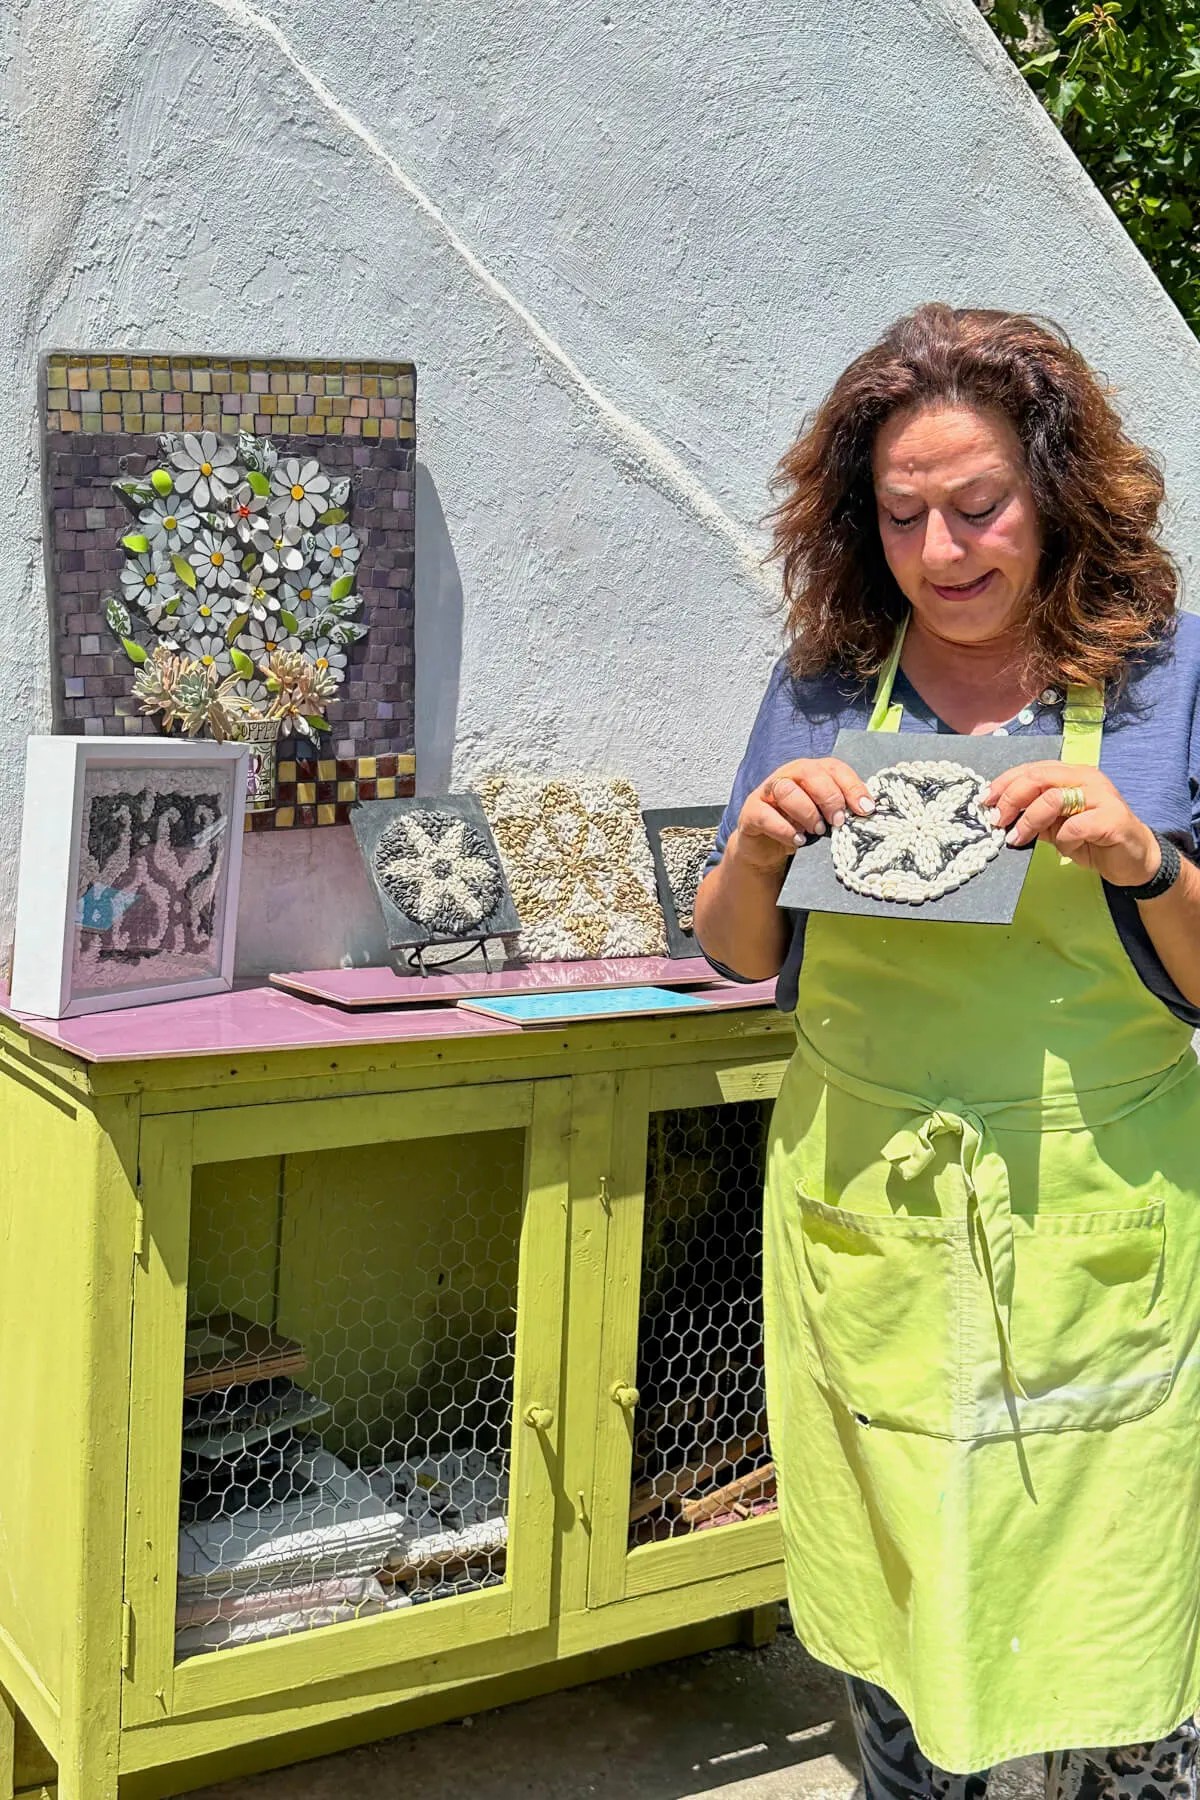 Dimitra demonstrating one of the techniques used in mosaics in a neon green apron next to a table with samples